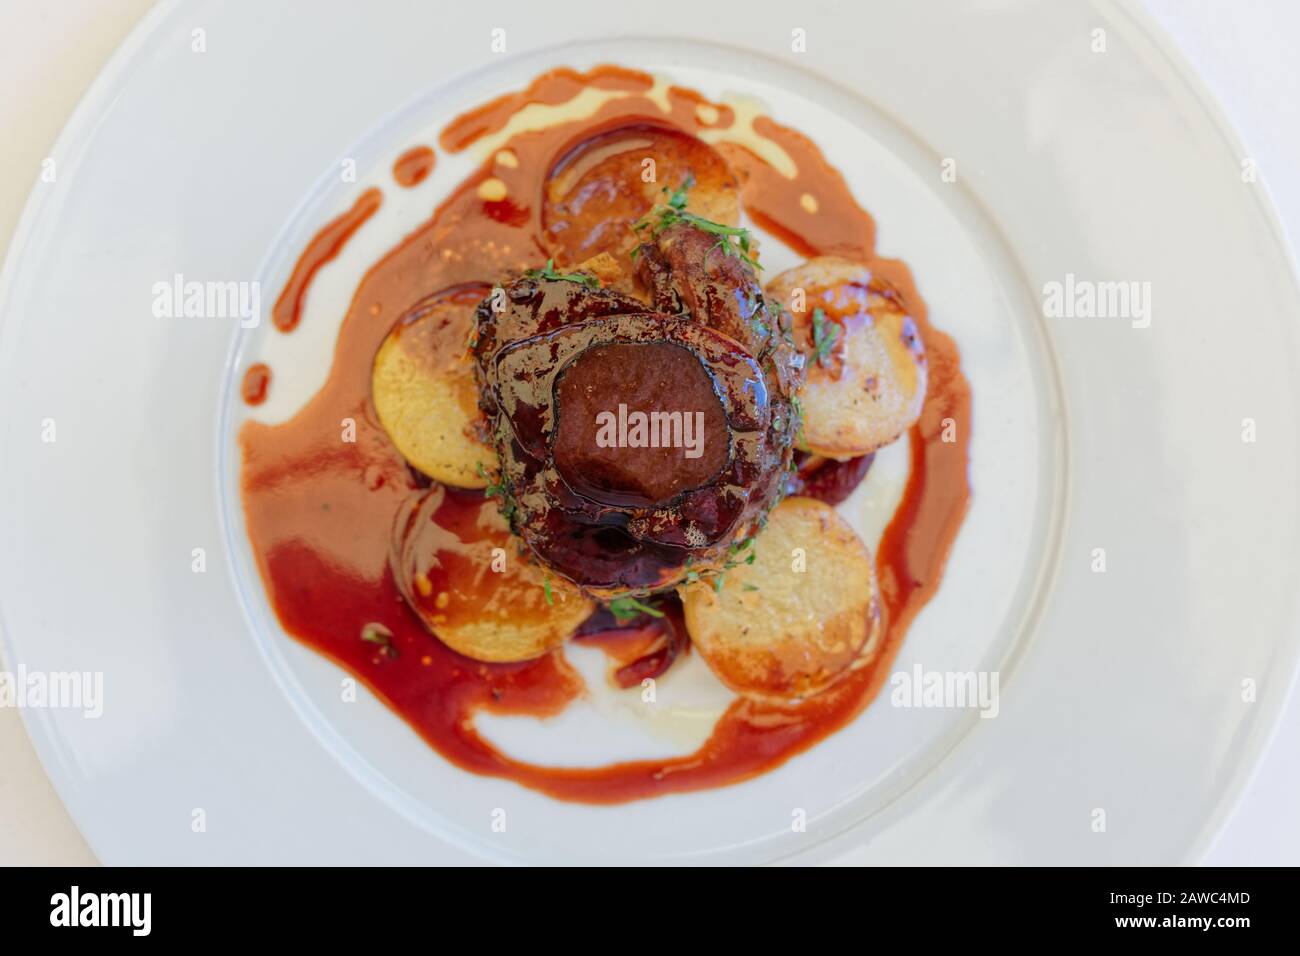 Fillet mignon steak with potatoes shot from above Stock Photo